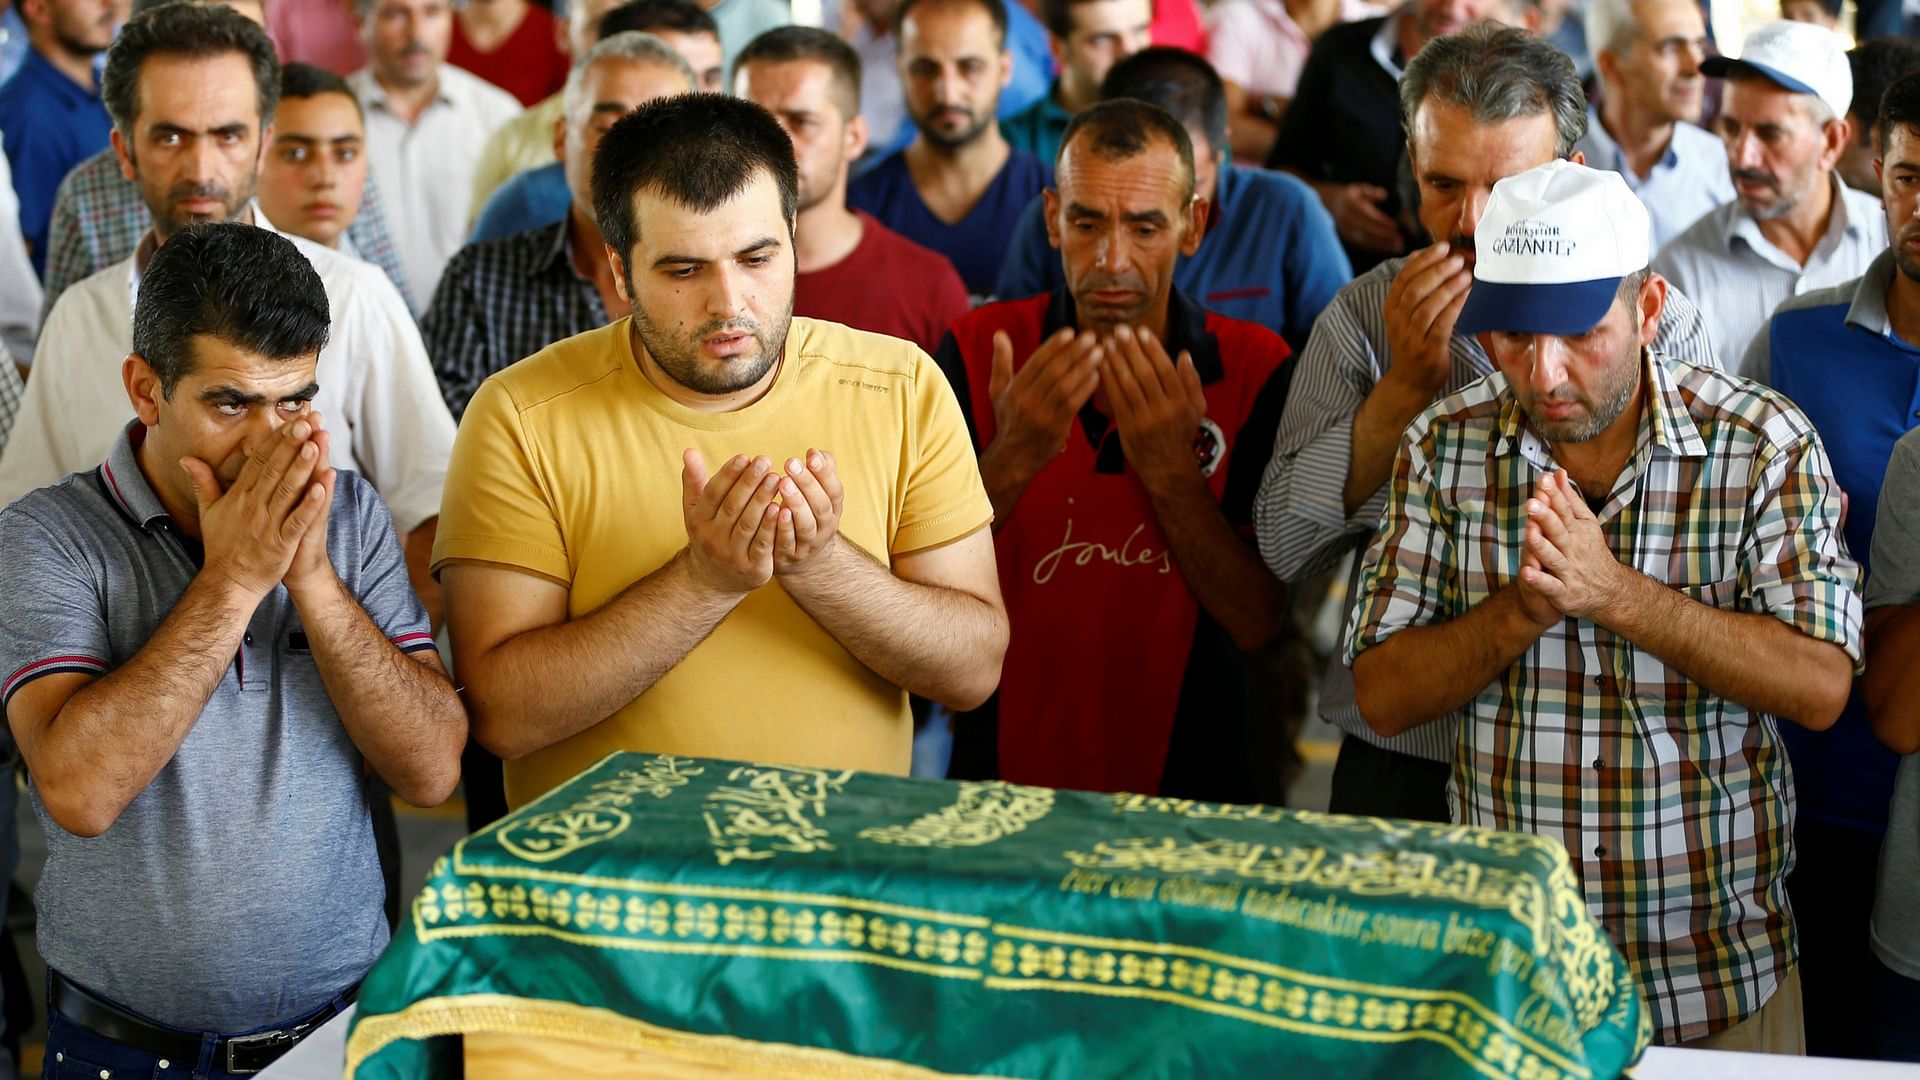 Funeral of a three month old victim who died in the Turkey wedding blast. (Photo: Reuters)